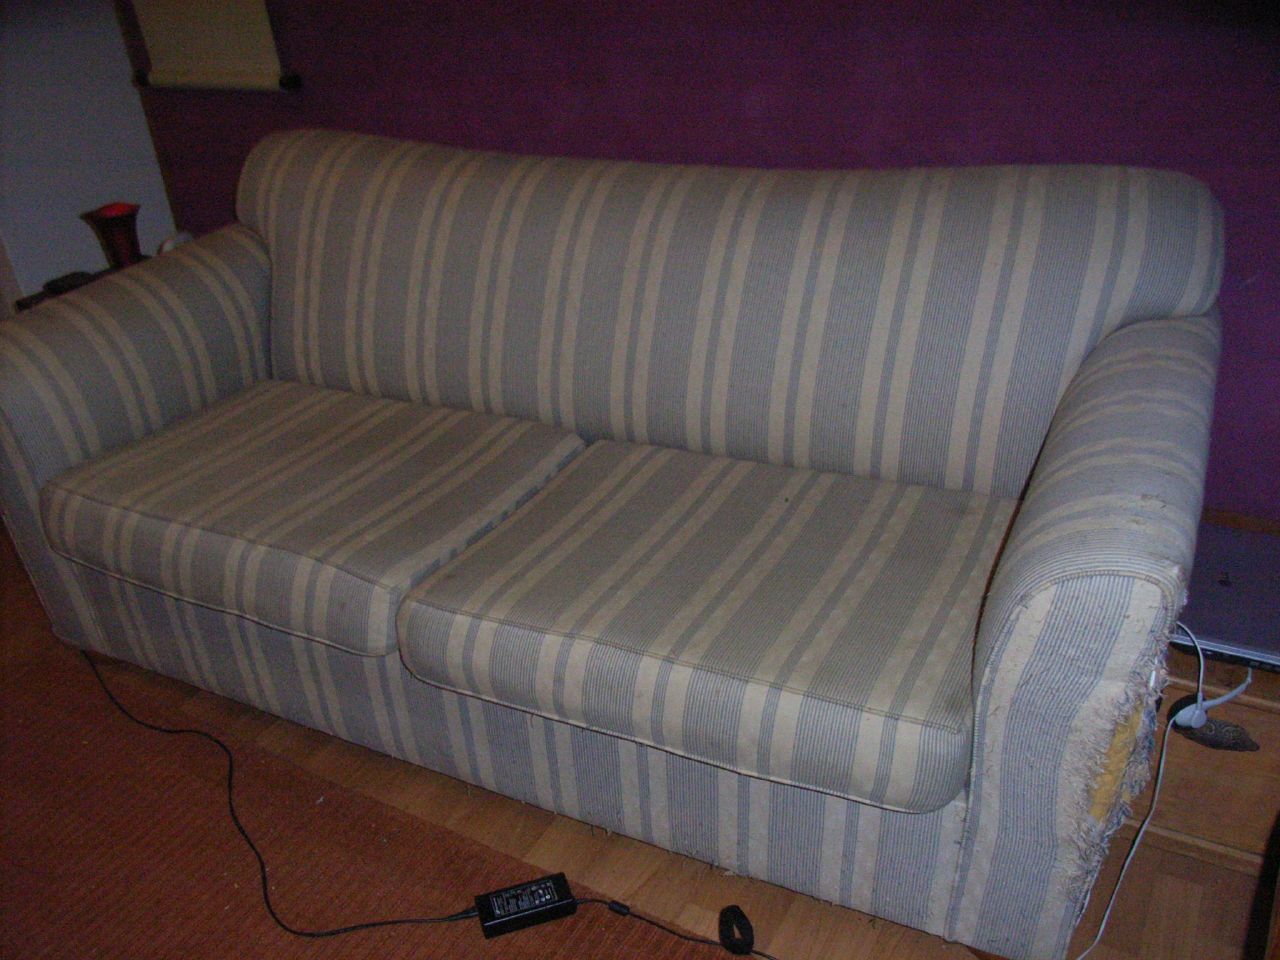 the couch is hooked up to a television remote control